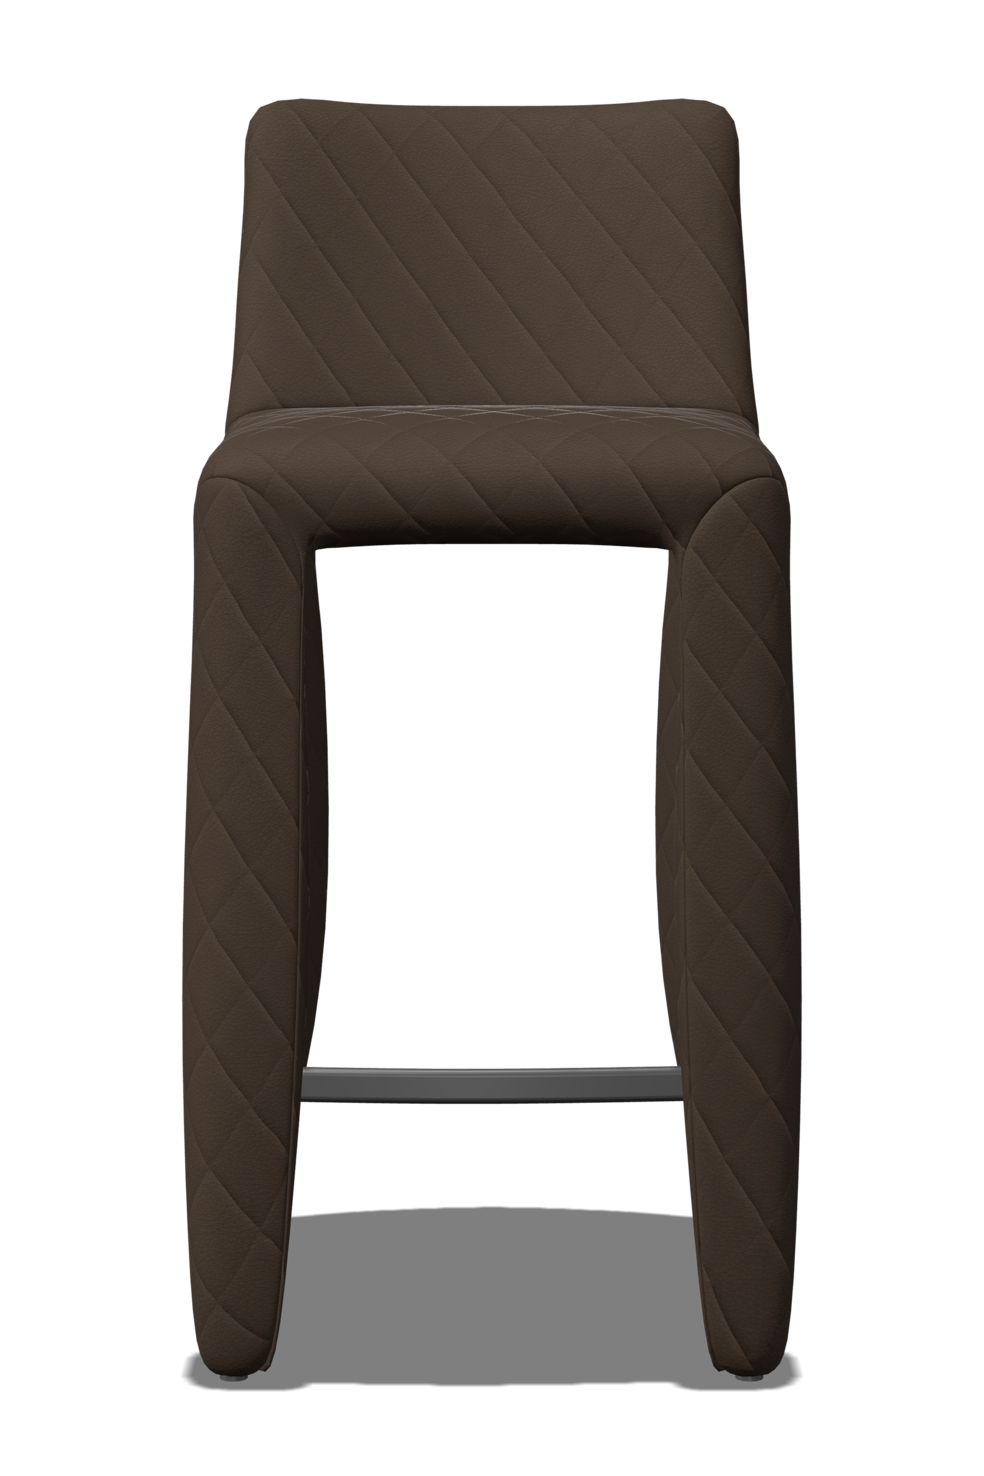 Monster Barstool low stitching brown